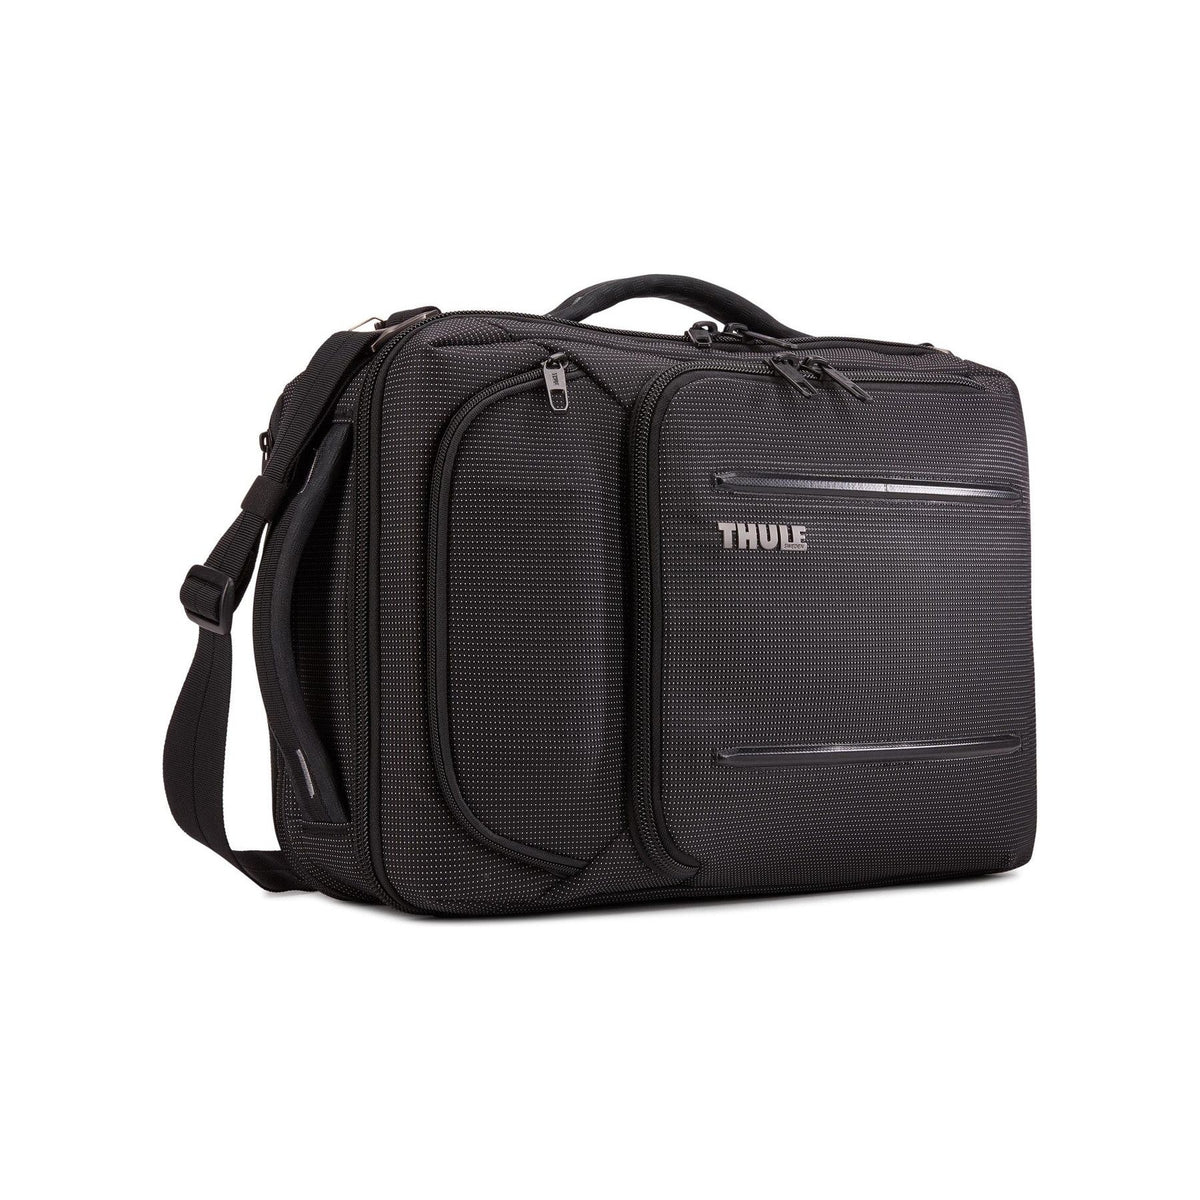 Thule Crossover 2 Convertible Laptop Bag 15.6in